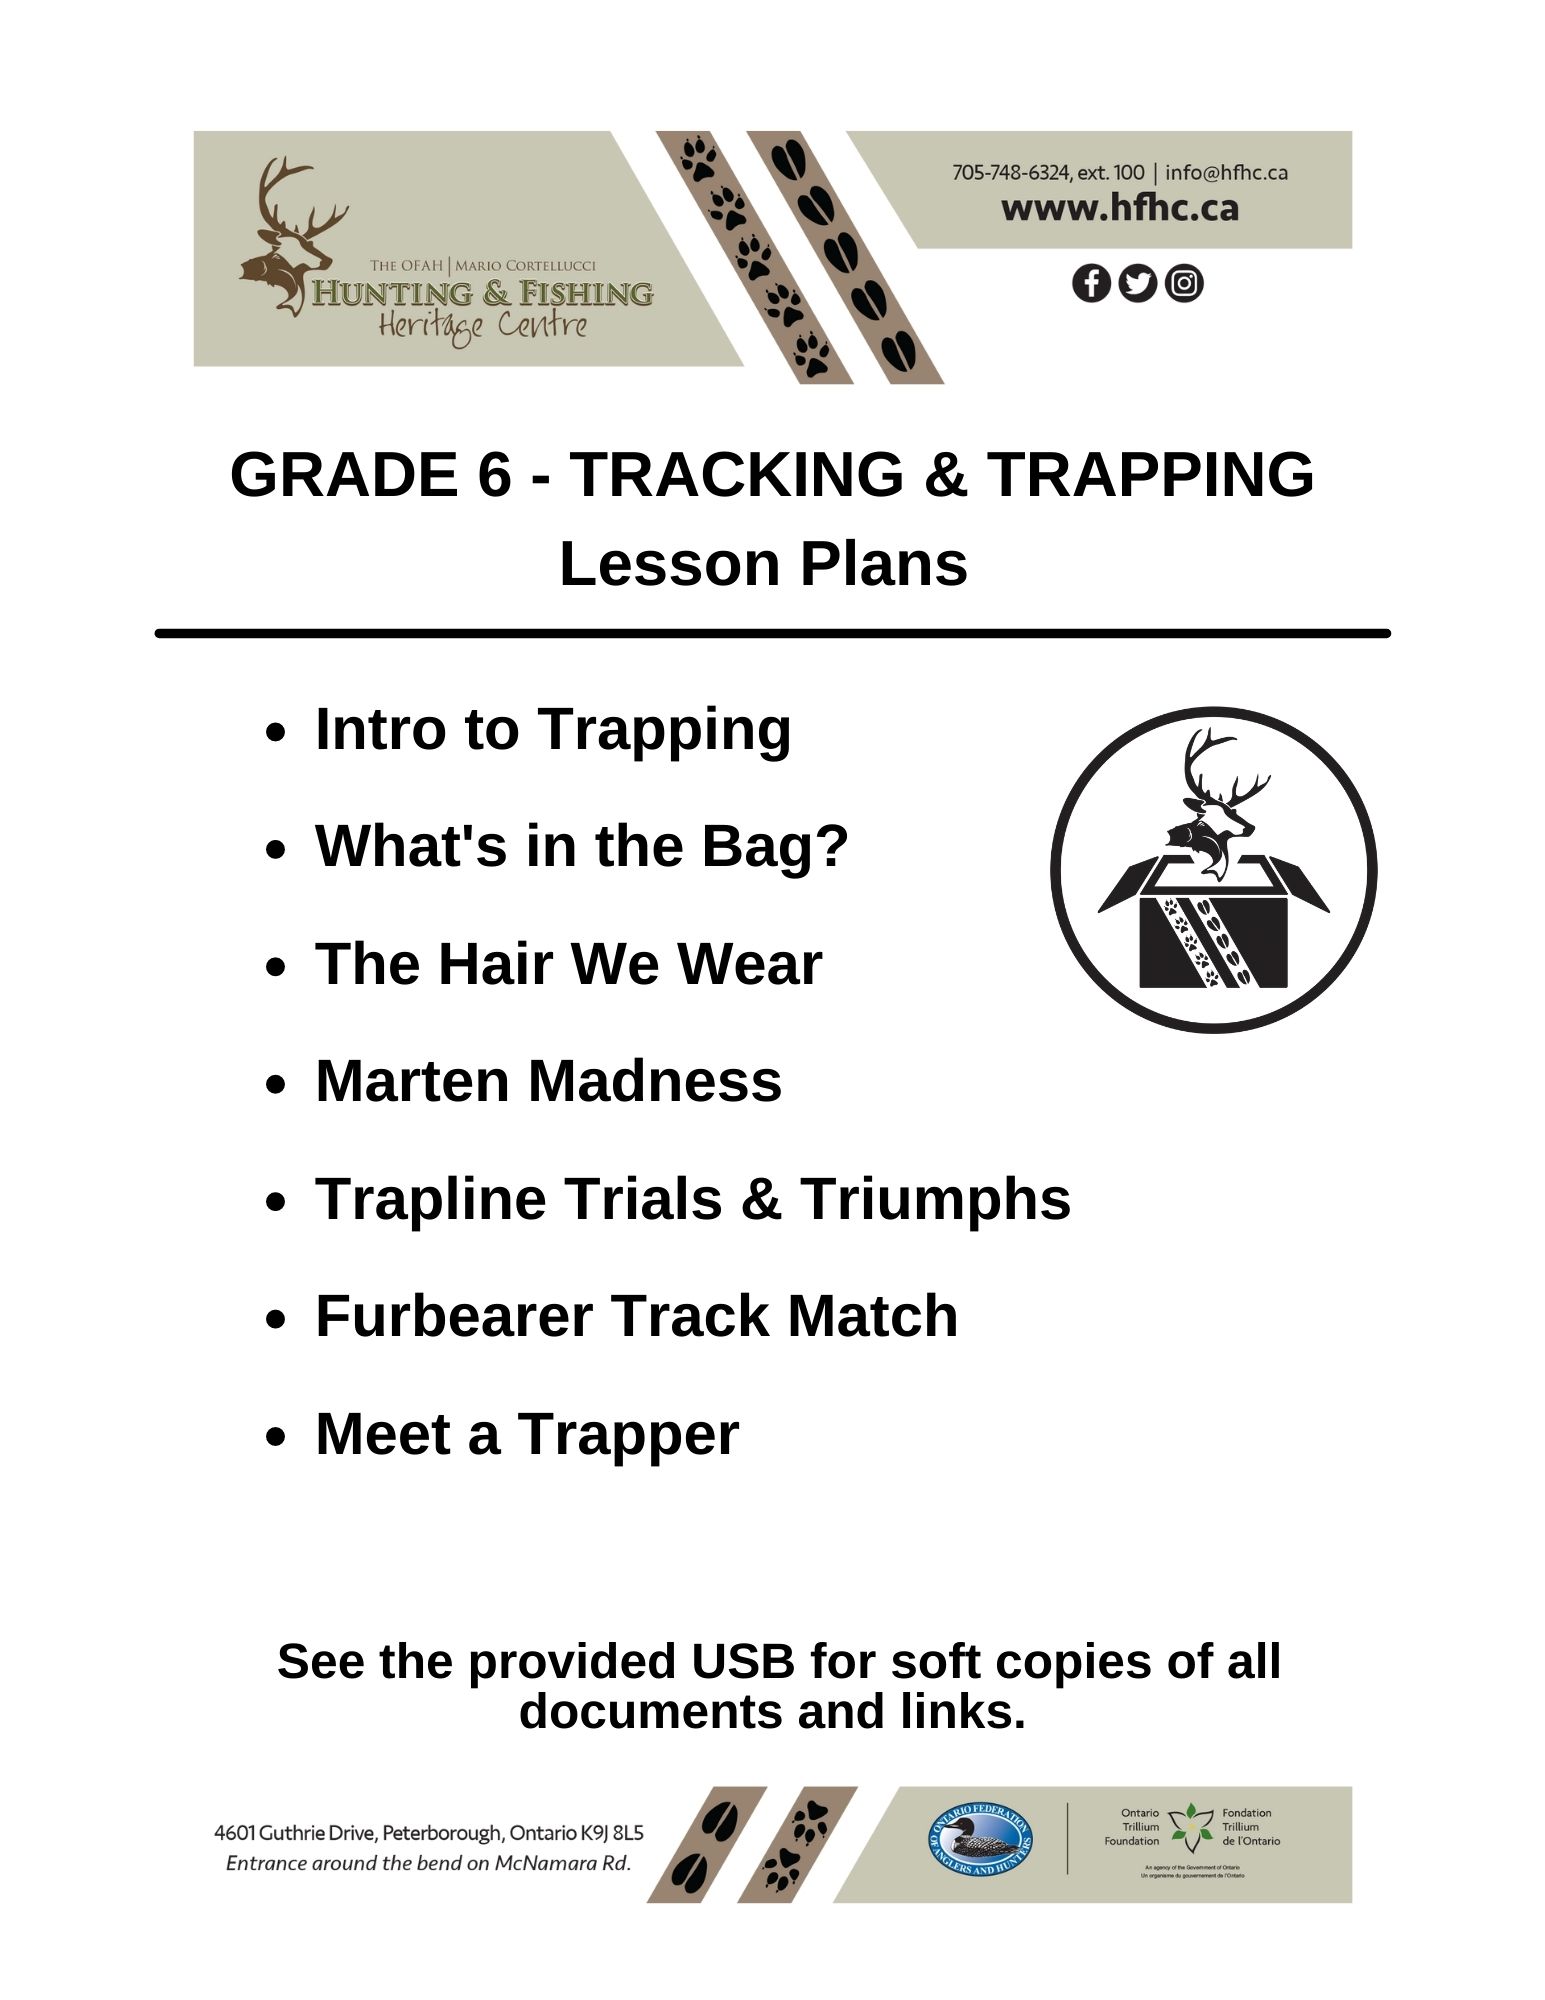 Grade 6 Conservation Crate - Trapping & Tracking